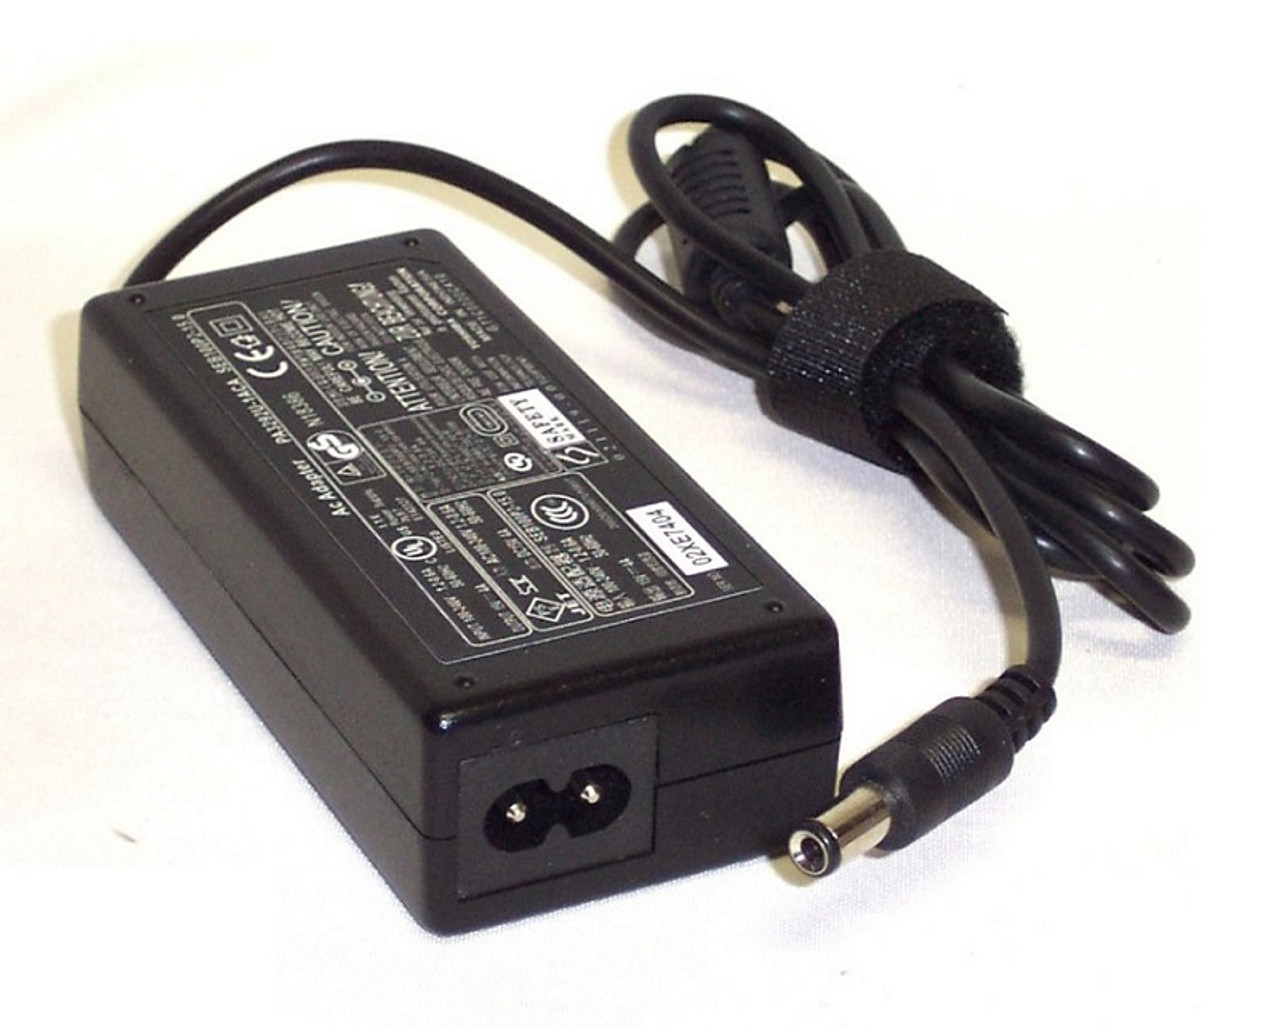 463952-001 - HP 180-Watts Pfc Smart AC Adapter for Laptop Power Cable not Included